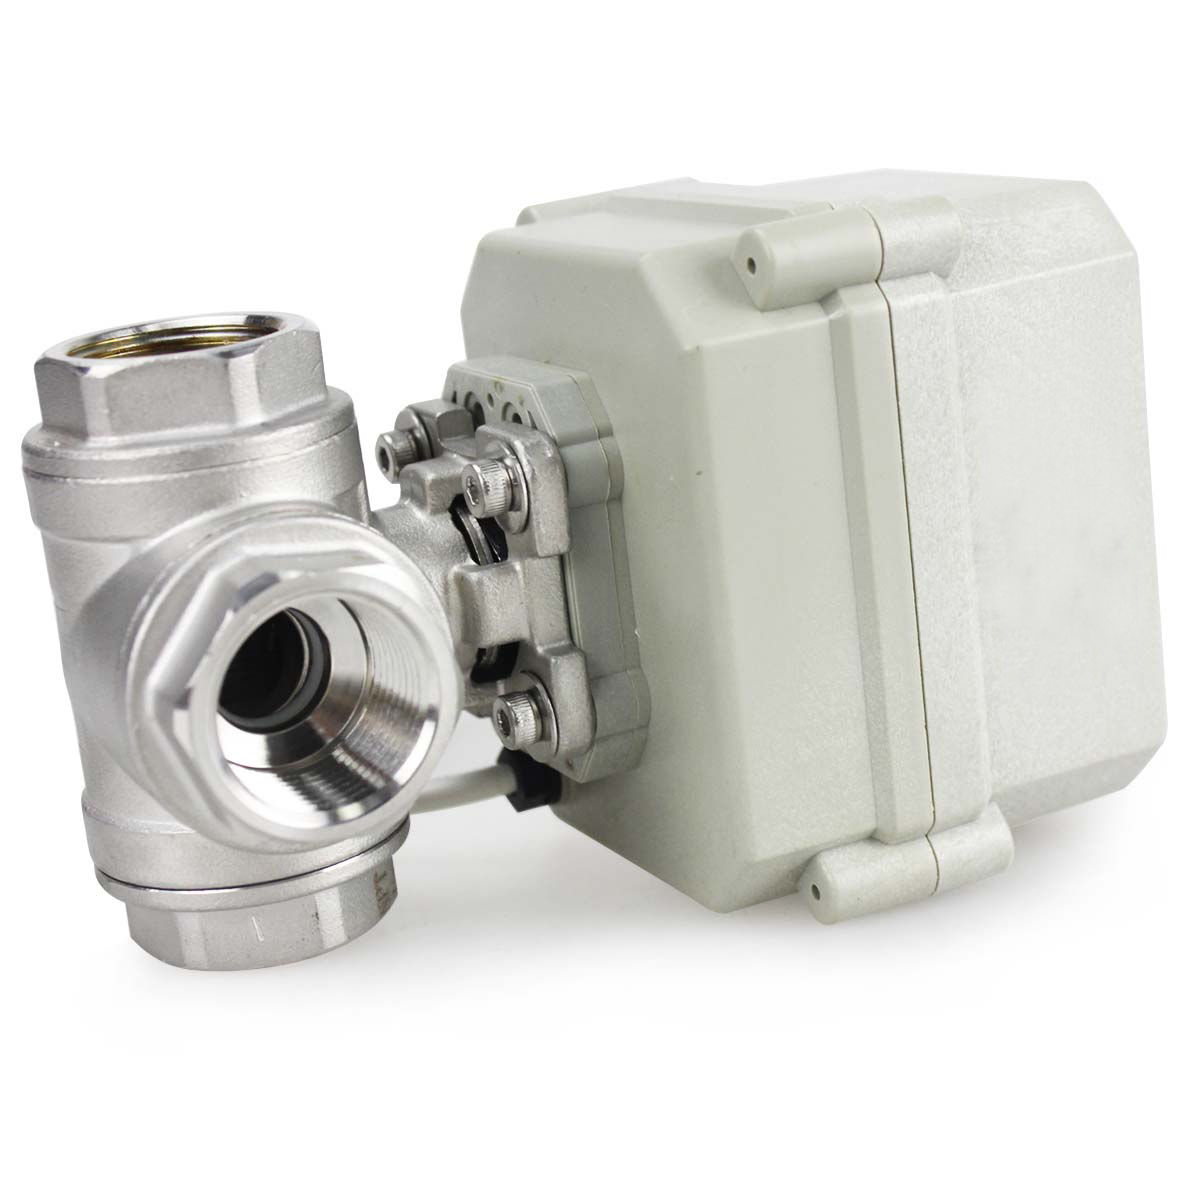 COVNA HK63-S-T 3 Way Stainless Steel Electric Ball Valve